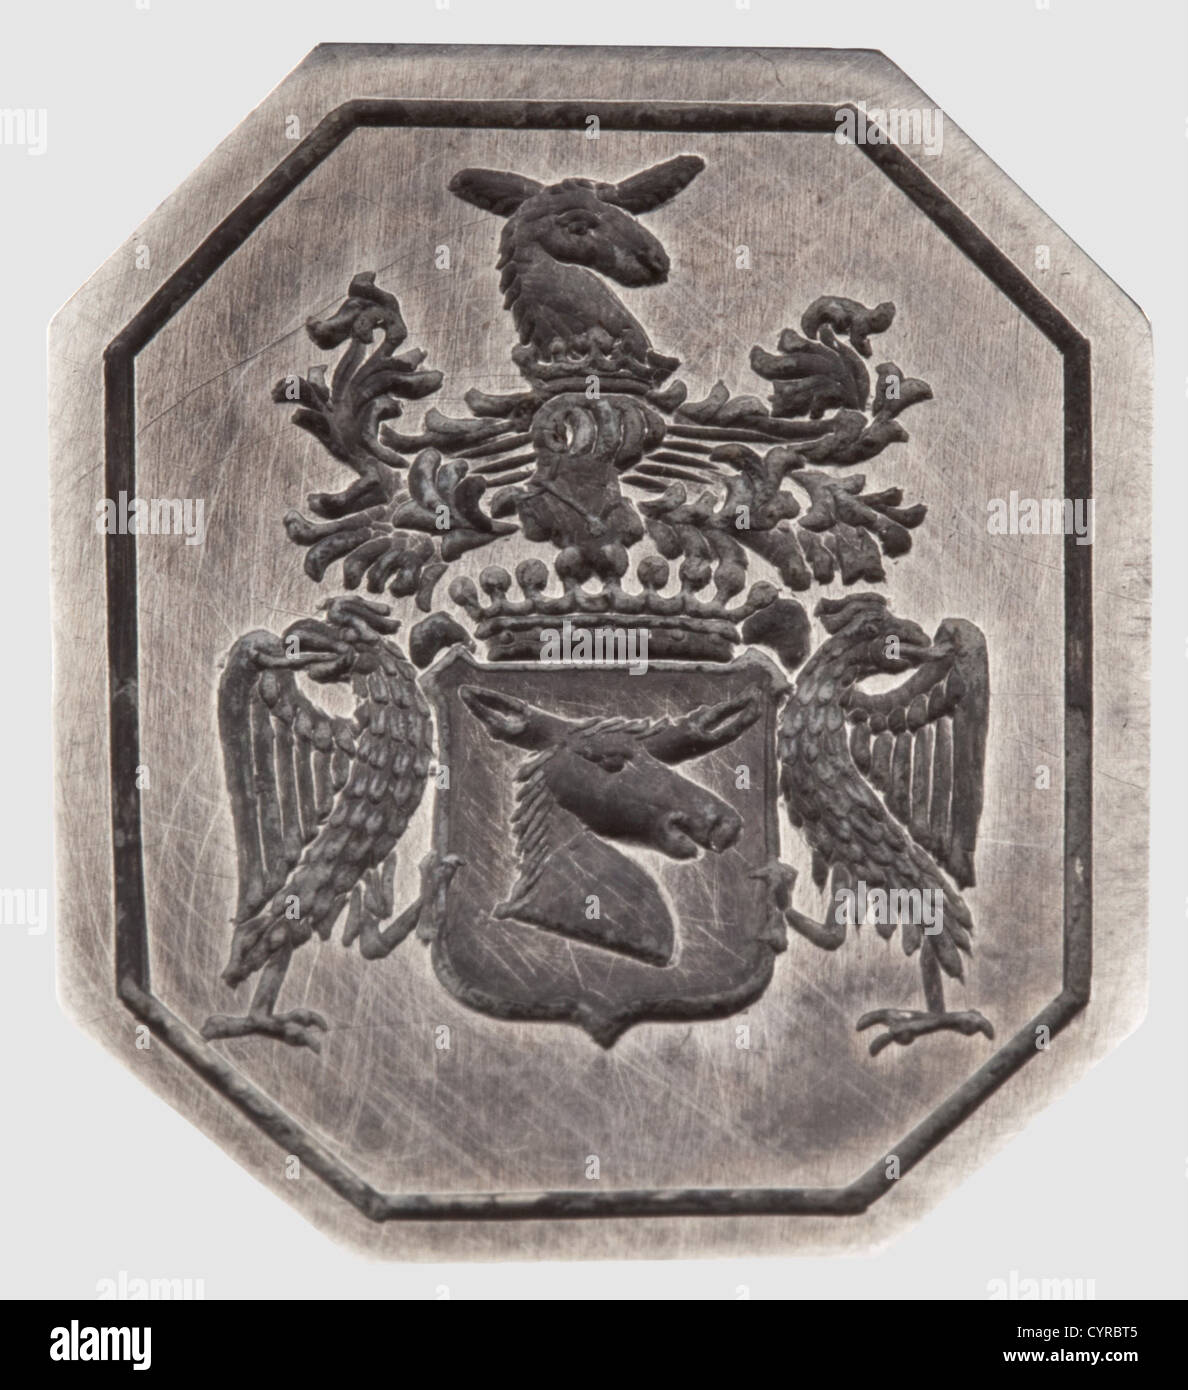 Ferdinand Count Zeppelin,a personal silver seal in its case Silver with illegible French hallmarks. Both side display fire-breathing dragons,torches,and bees in relief. The octagonal silver(more hallmarks)seal face is cut with the coat of arms for the Counts von Zeppelin. Total height 9.5 cm. Weight 61 g. In the original green case with light interior lining,and inscribed in the lid 'Au Rubis - Chambéry'. Presumably a gift to the Count von Zepplin from the 1880's using a French seal from the Secon historic,historical,19th century,transport,transportat,Additional-Rights-Clearences-Not Available Stock Photo